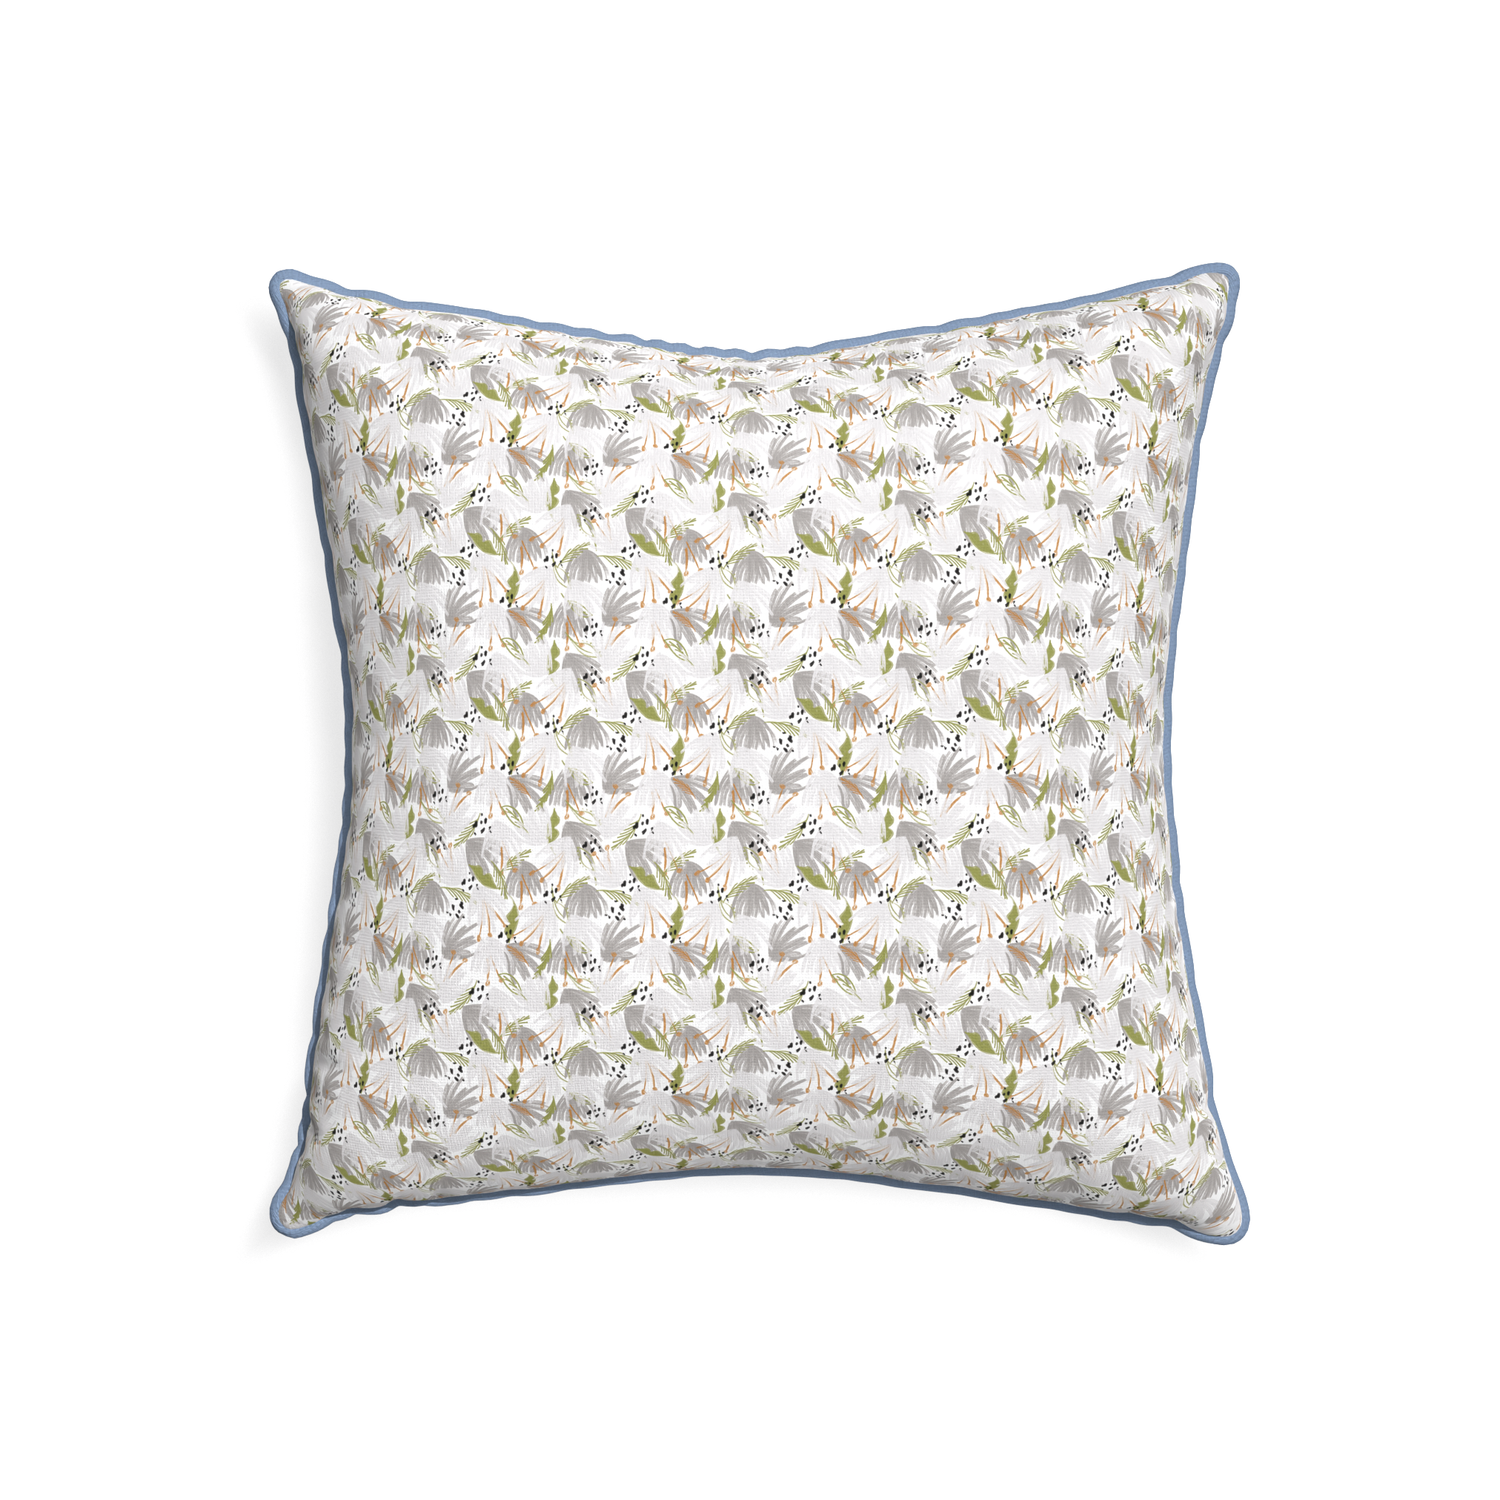 22-square eden grey custom pillow with sky piping on white background